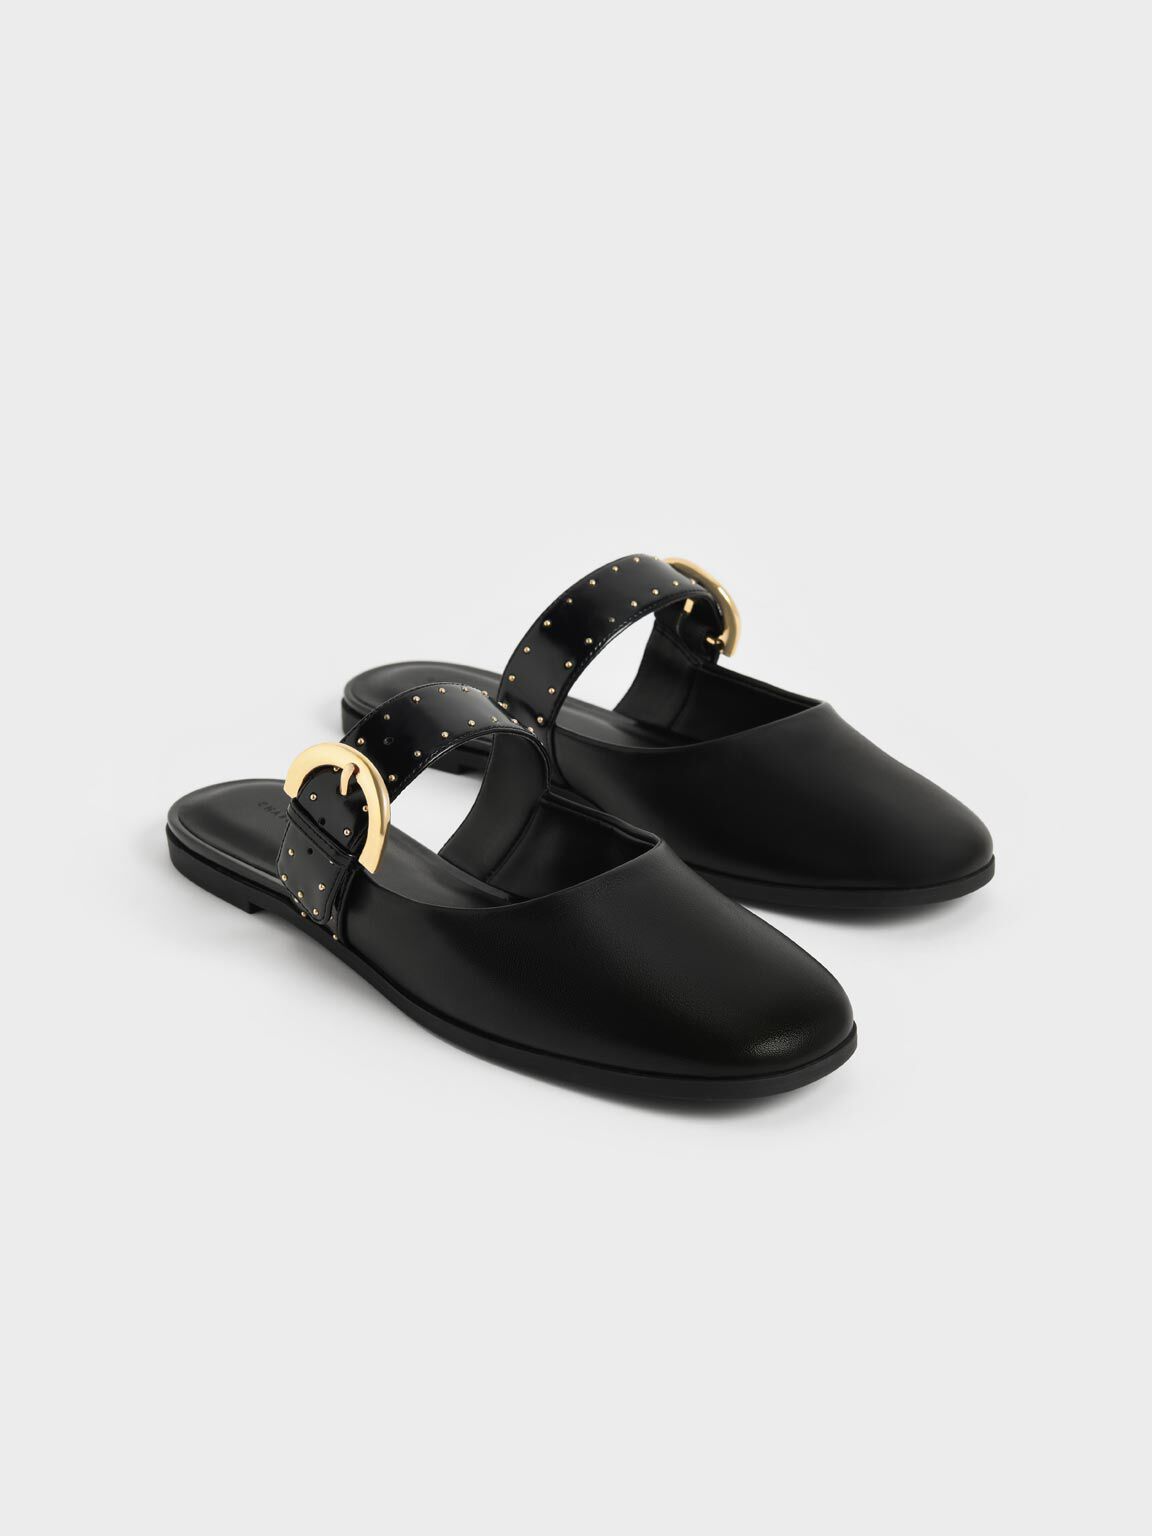 Black Studded Buckled Flat Mules - CHARLES & KEITH KH